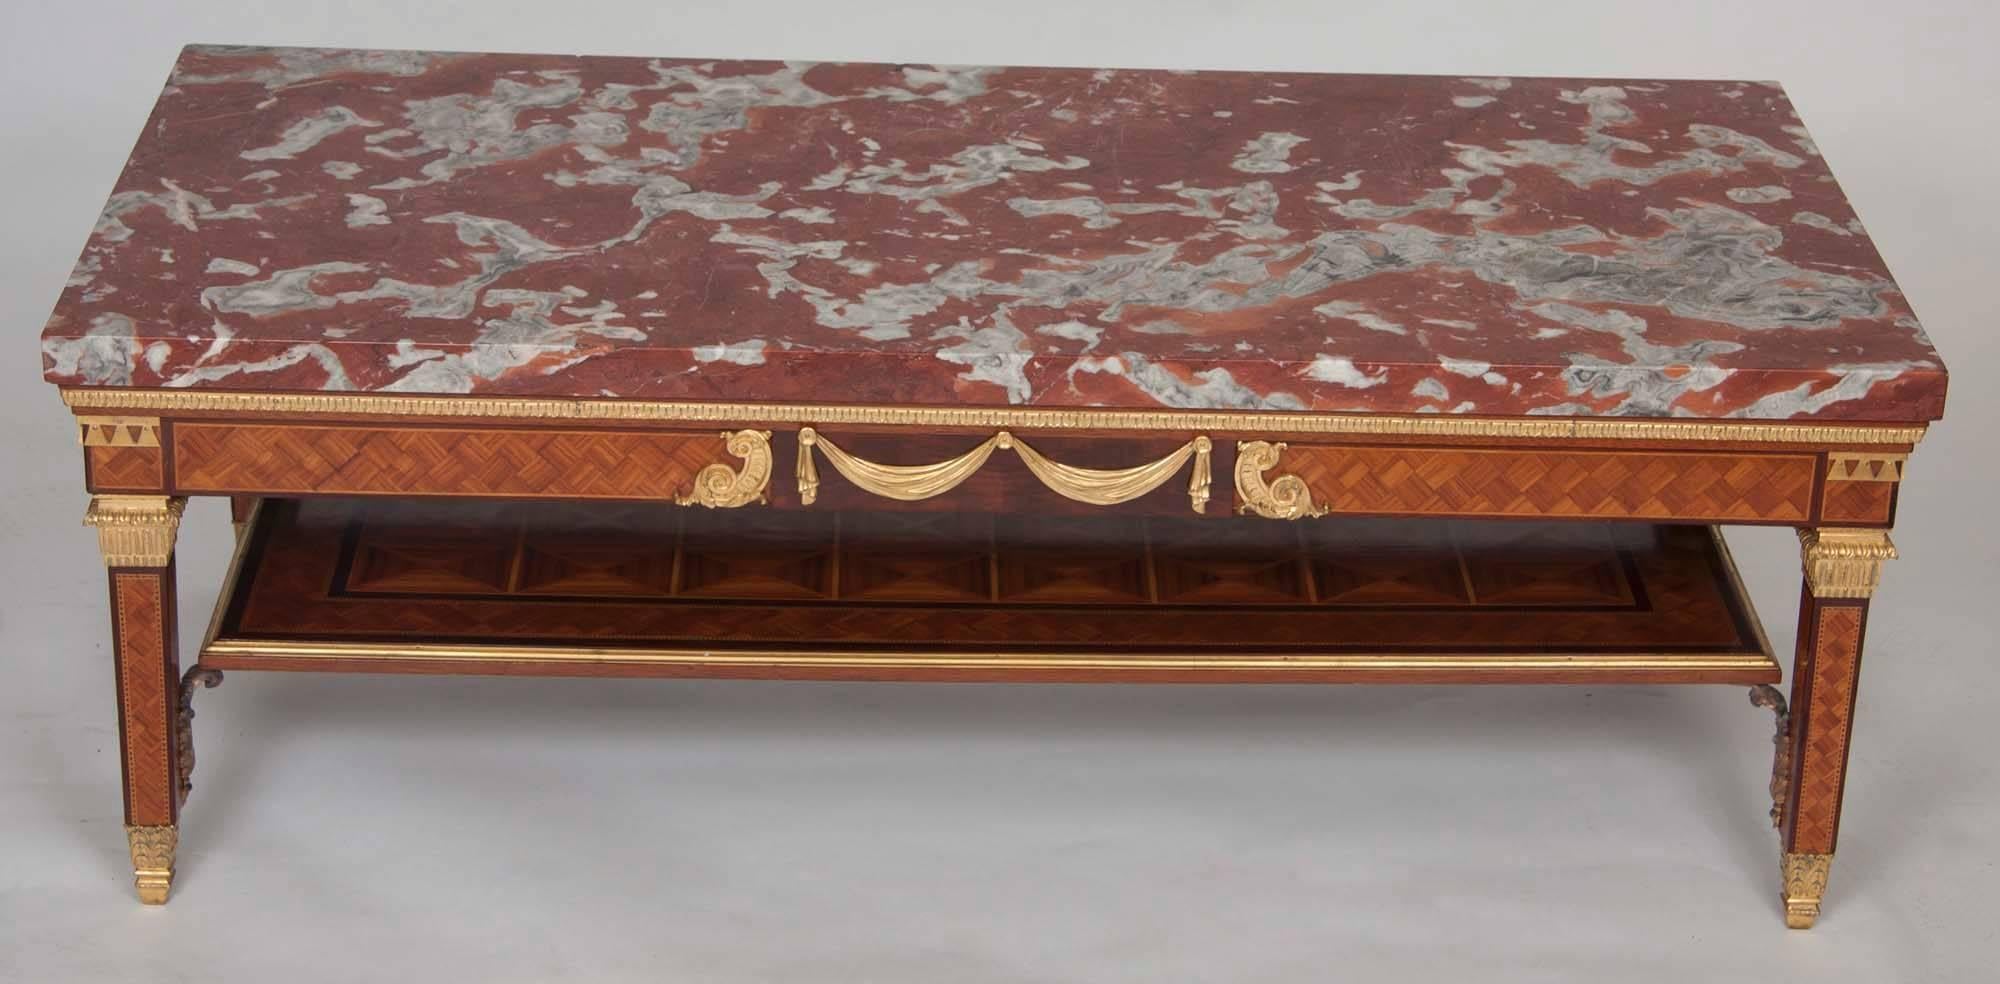 American, 19th century.
Marquetry coffee table with marble top.
Provenance: Estate of Caldwell, New Jersey.